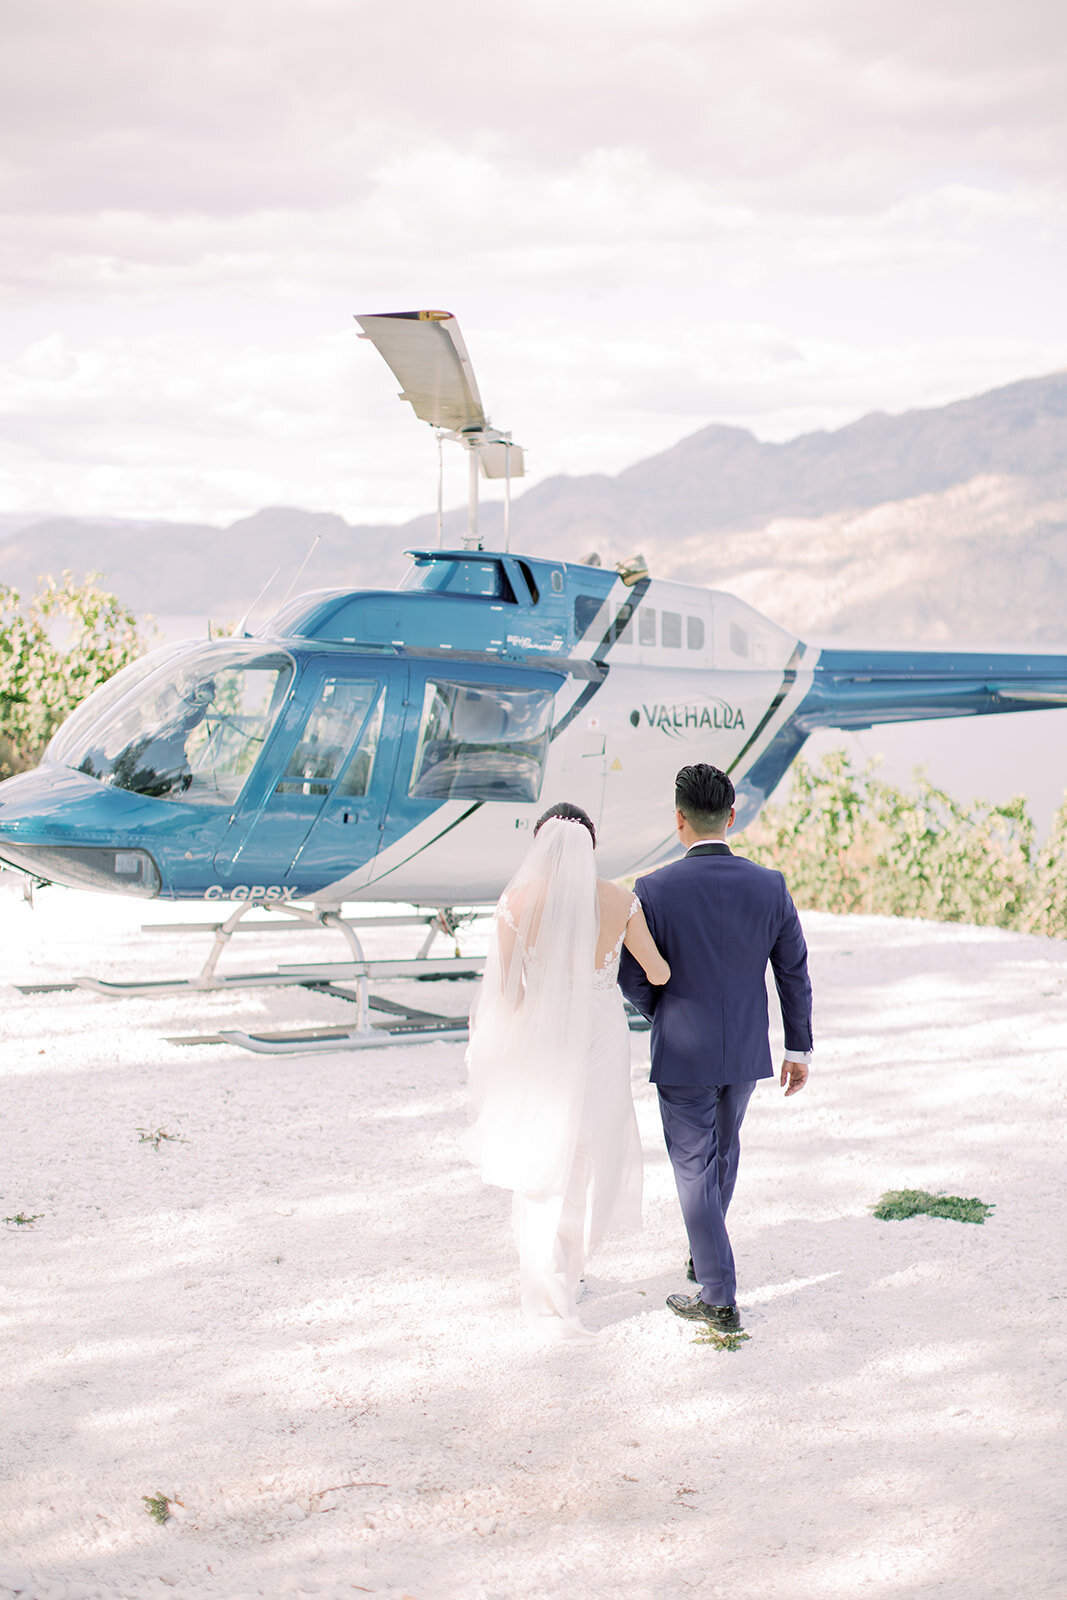 We planned an exciting wedding for this bride and groom where they took a helicopter tour for their wedding portraits.